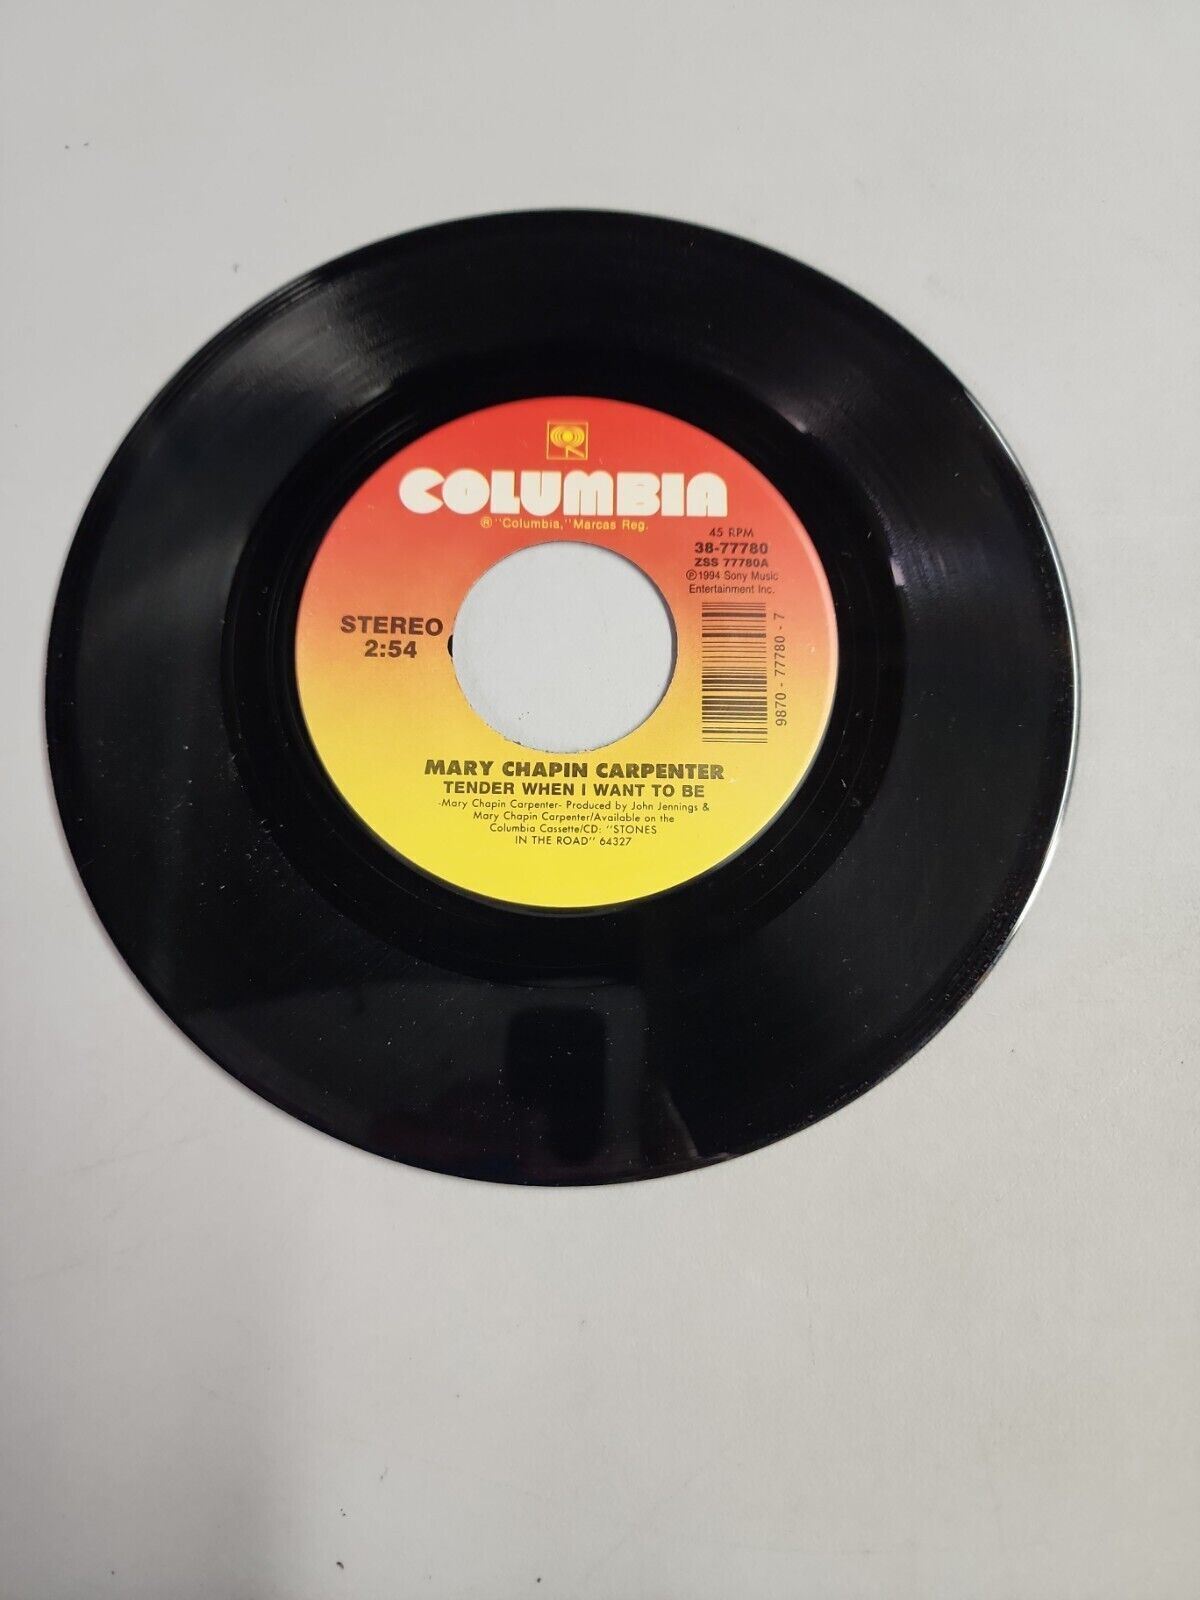 Mary Chapin Carpenter - Tender When I Want to Be - Columbia (45RPM 7”)(RC369) 